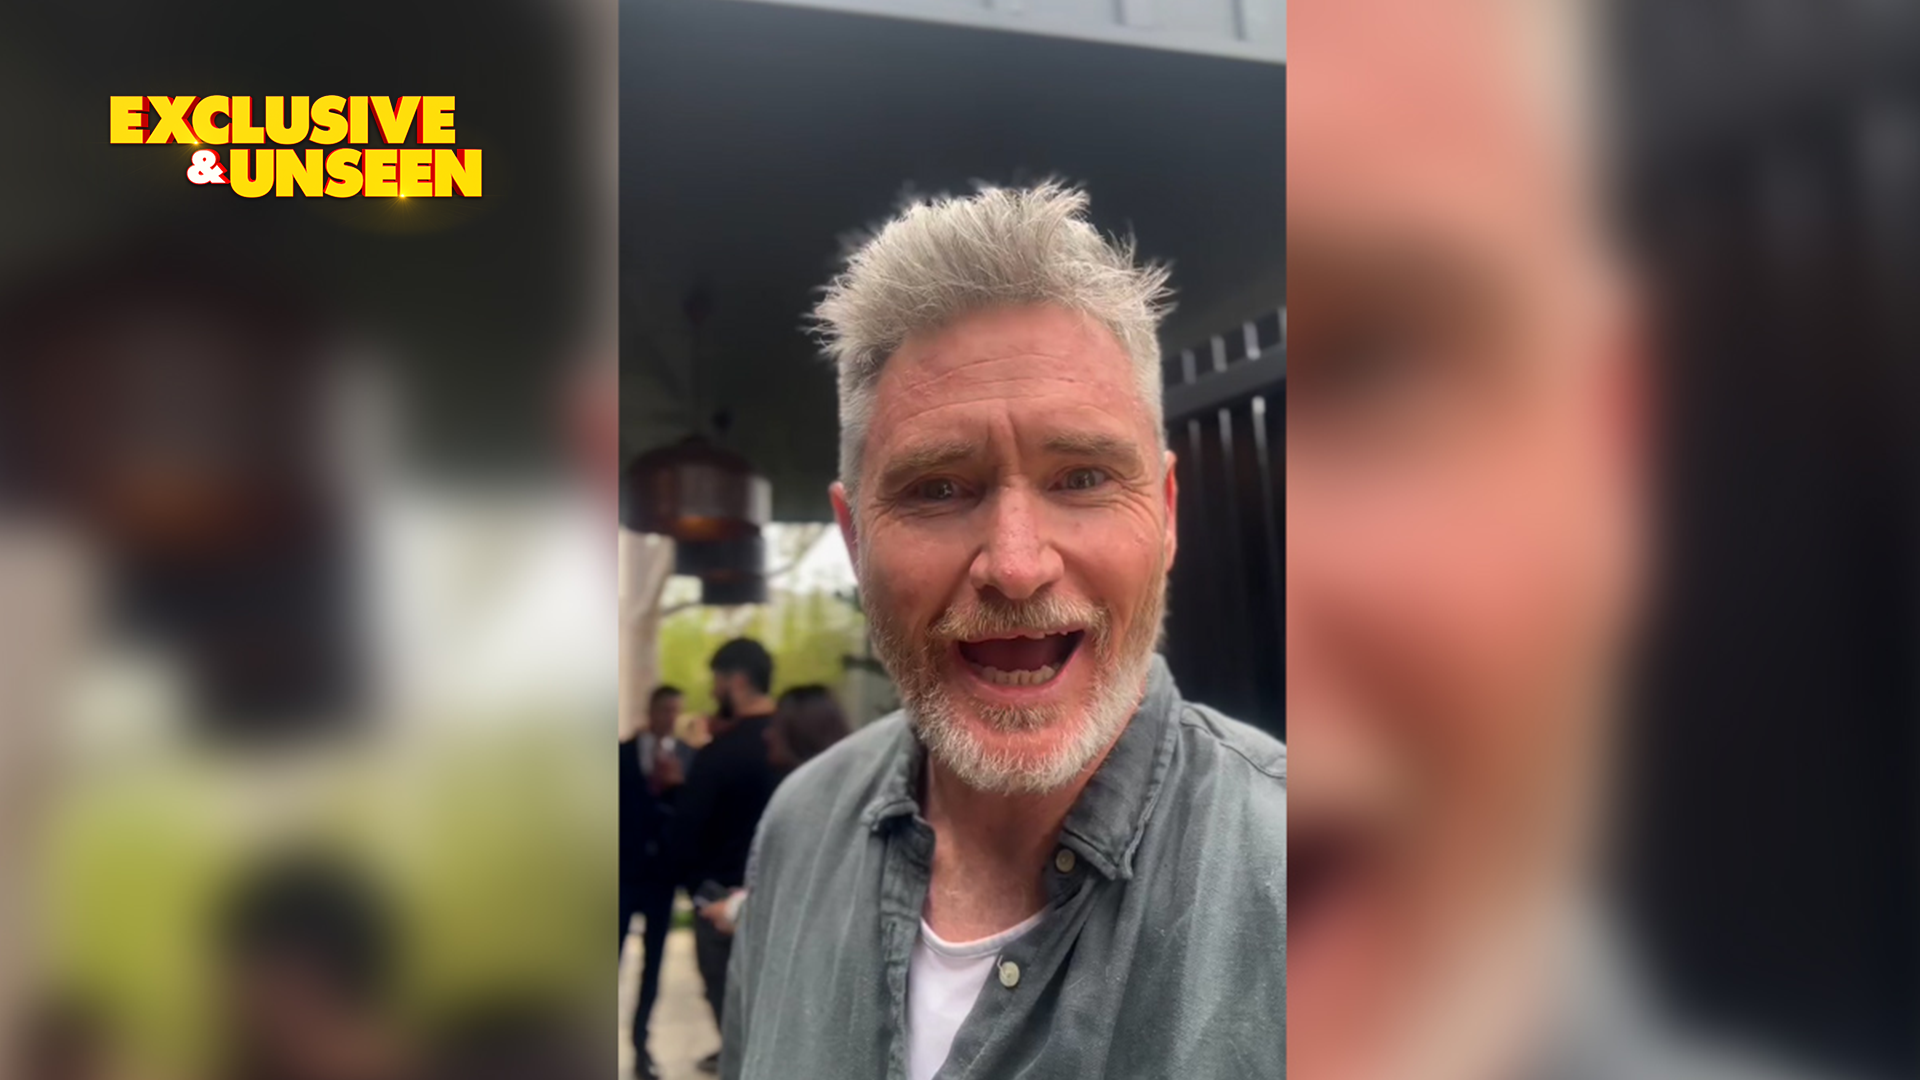 Exclusive: Dave Hughes thrilled by The block auction's 'rocking start'